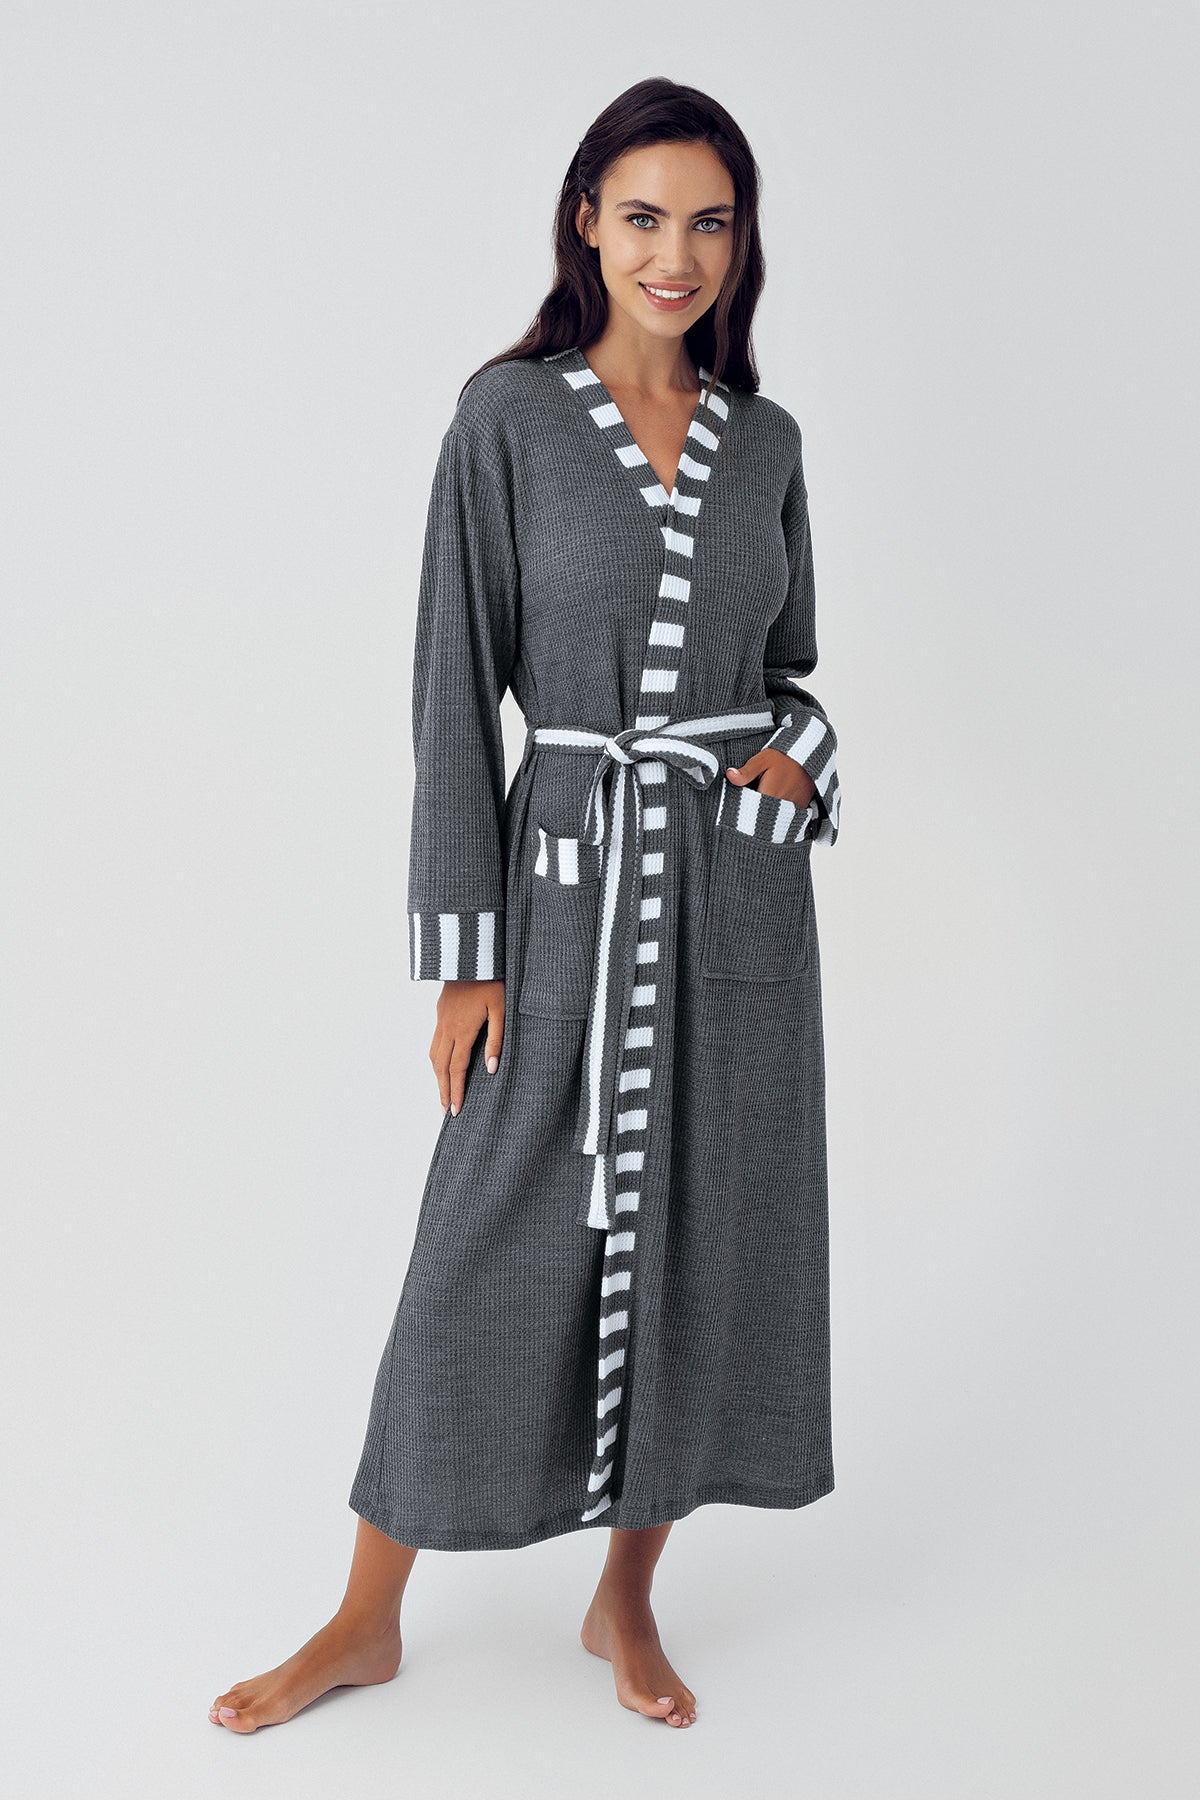 Shopymommy 15513 Knitwear Long Maternity Robe Anthracite